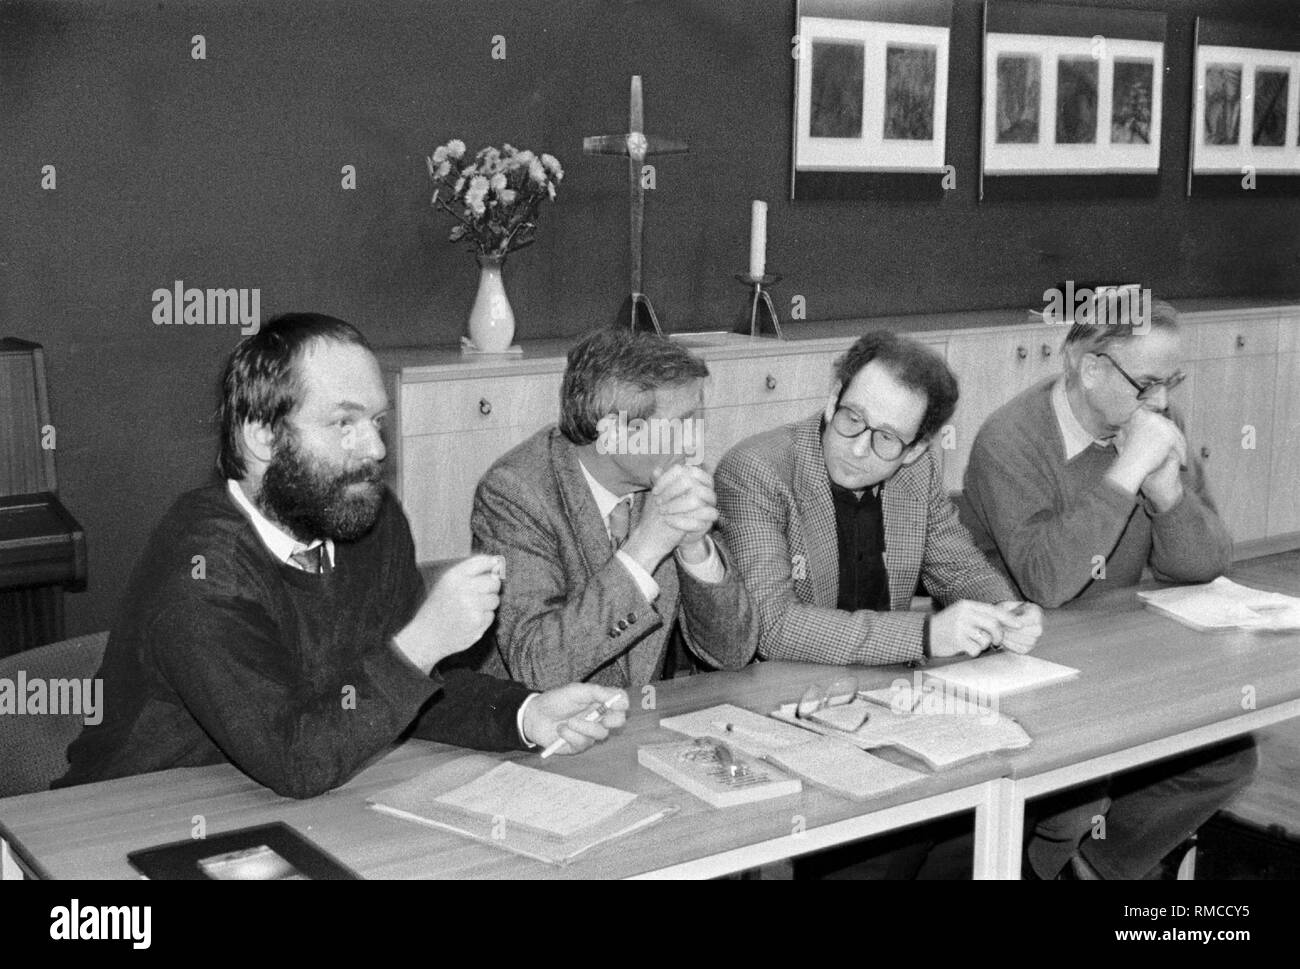 Discussion event in the Advent Church: (from left to right): Markus Meckel, Gerhardt Thomas (editor-in-chief, the church), Konrad Weiss, ..., Germany, Berlin, 09.11.1990. Stock Photo